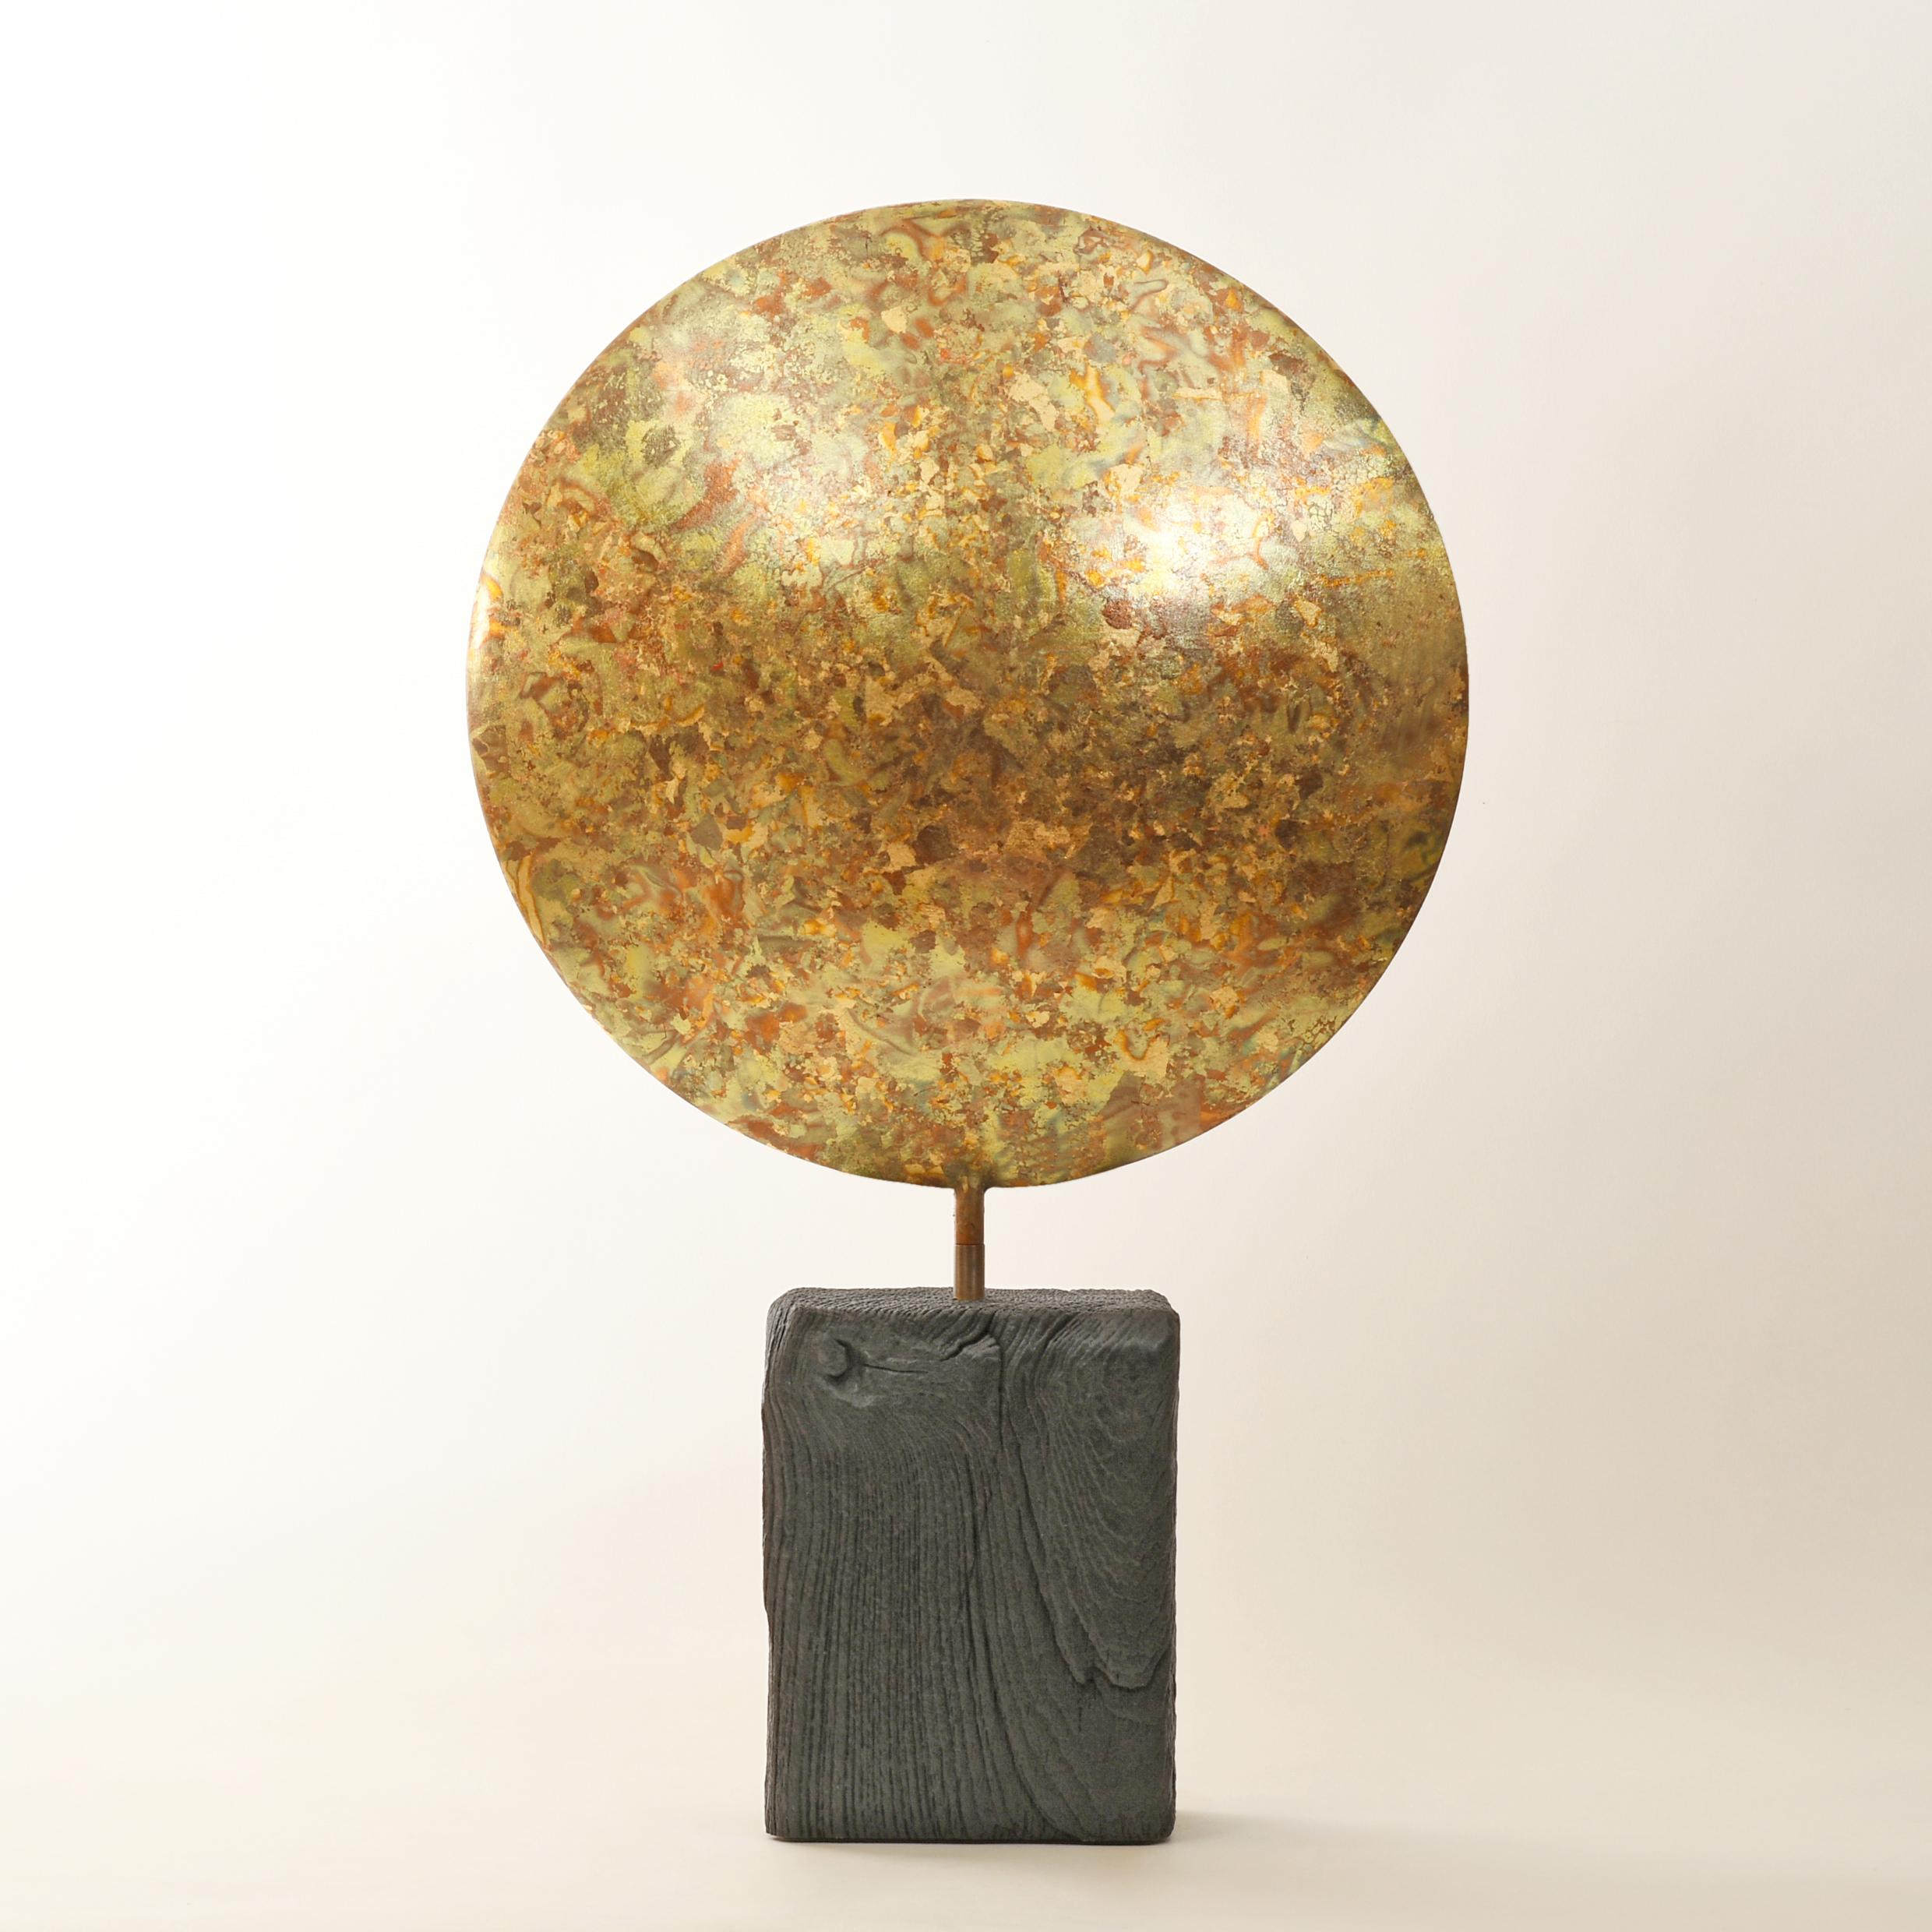 Leafed resin freely rotating on a scorched oak base
Unique 
Stamped with monogram signature and uniquely numbered 793
The pulverised metal leaf is lacquered for protection
Turning the sculpture allows face to be chosen or an angle to be set
Weight: